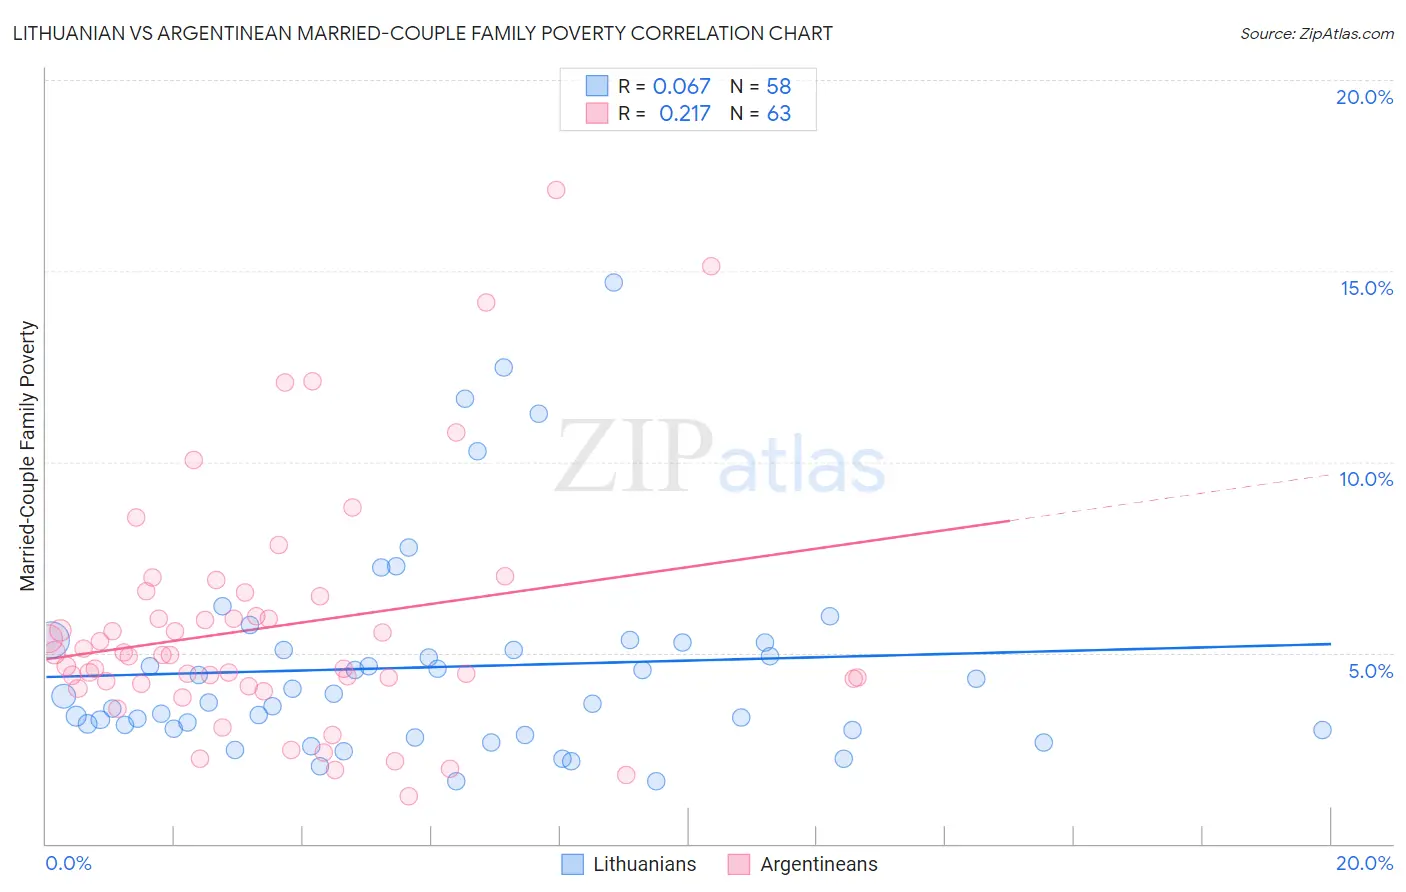 Lithuanian vs Argentinean Married-Couple Family Poverty